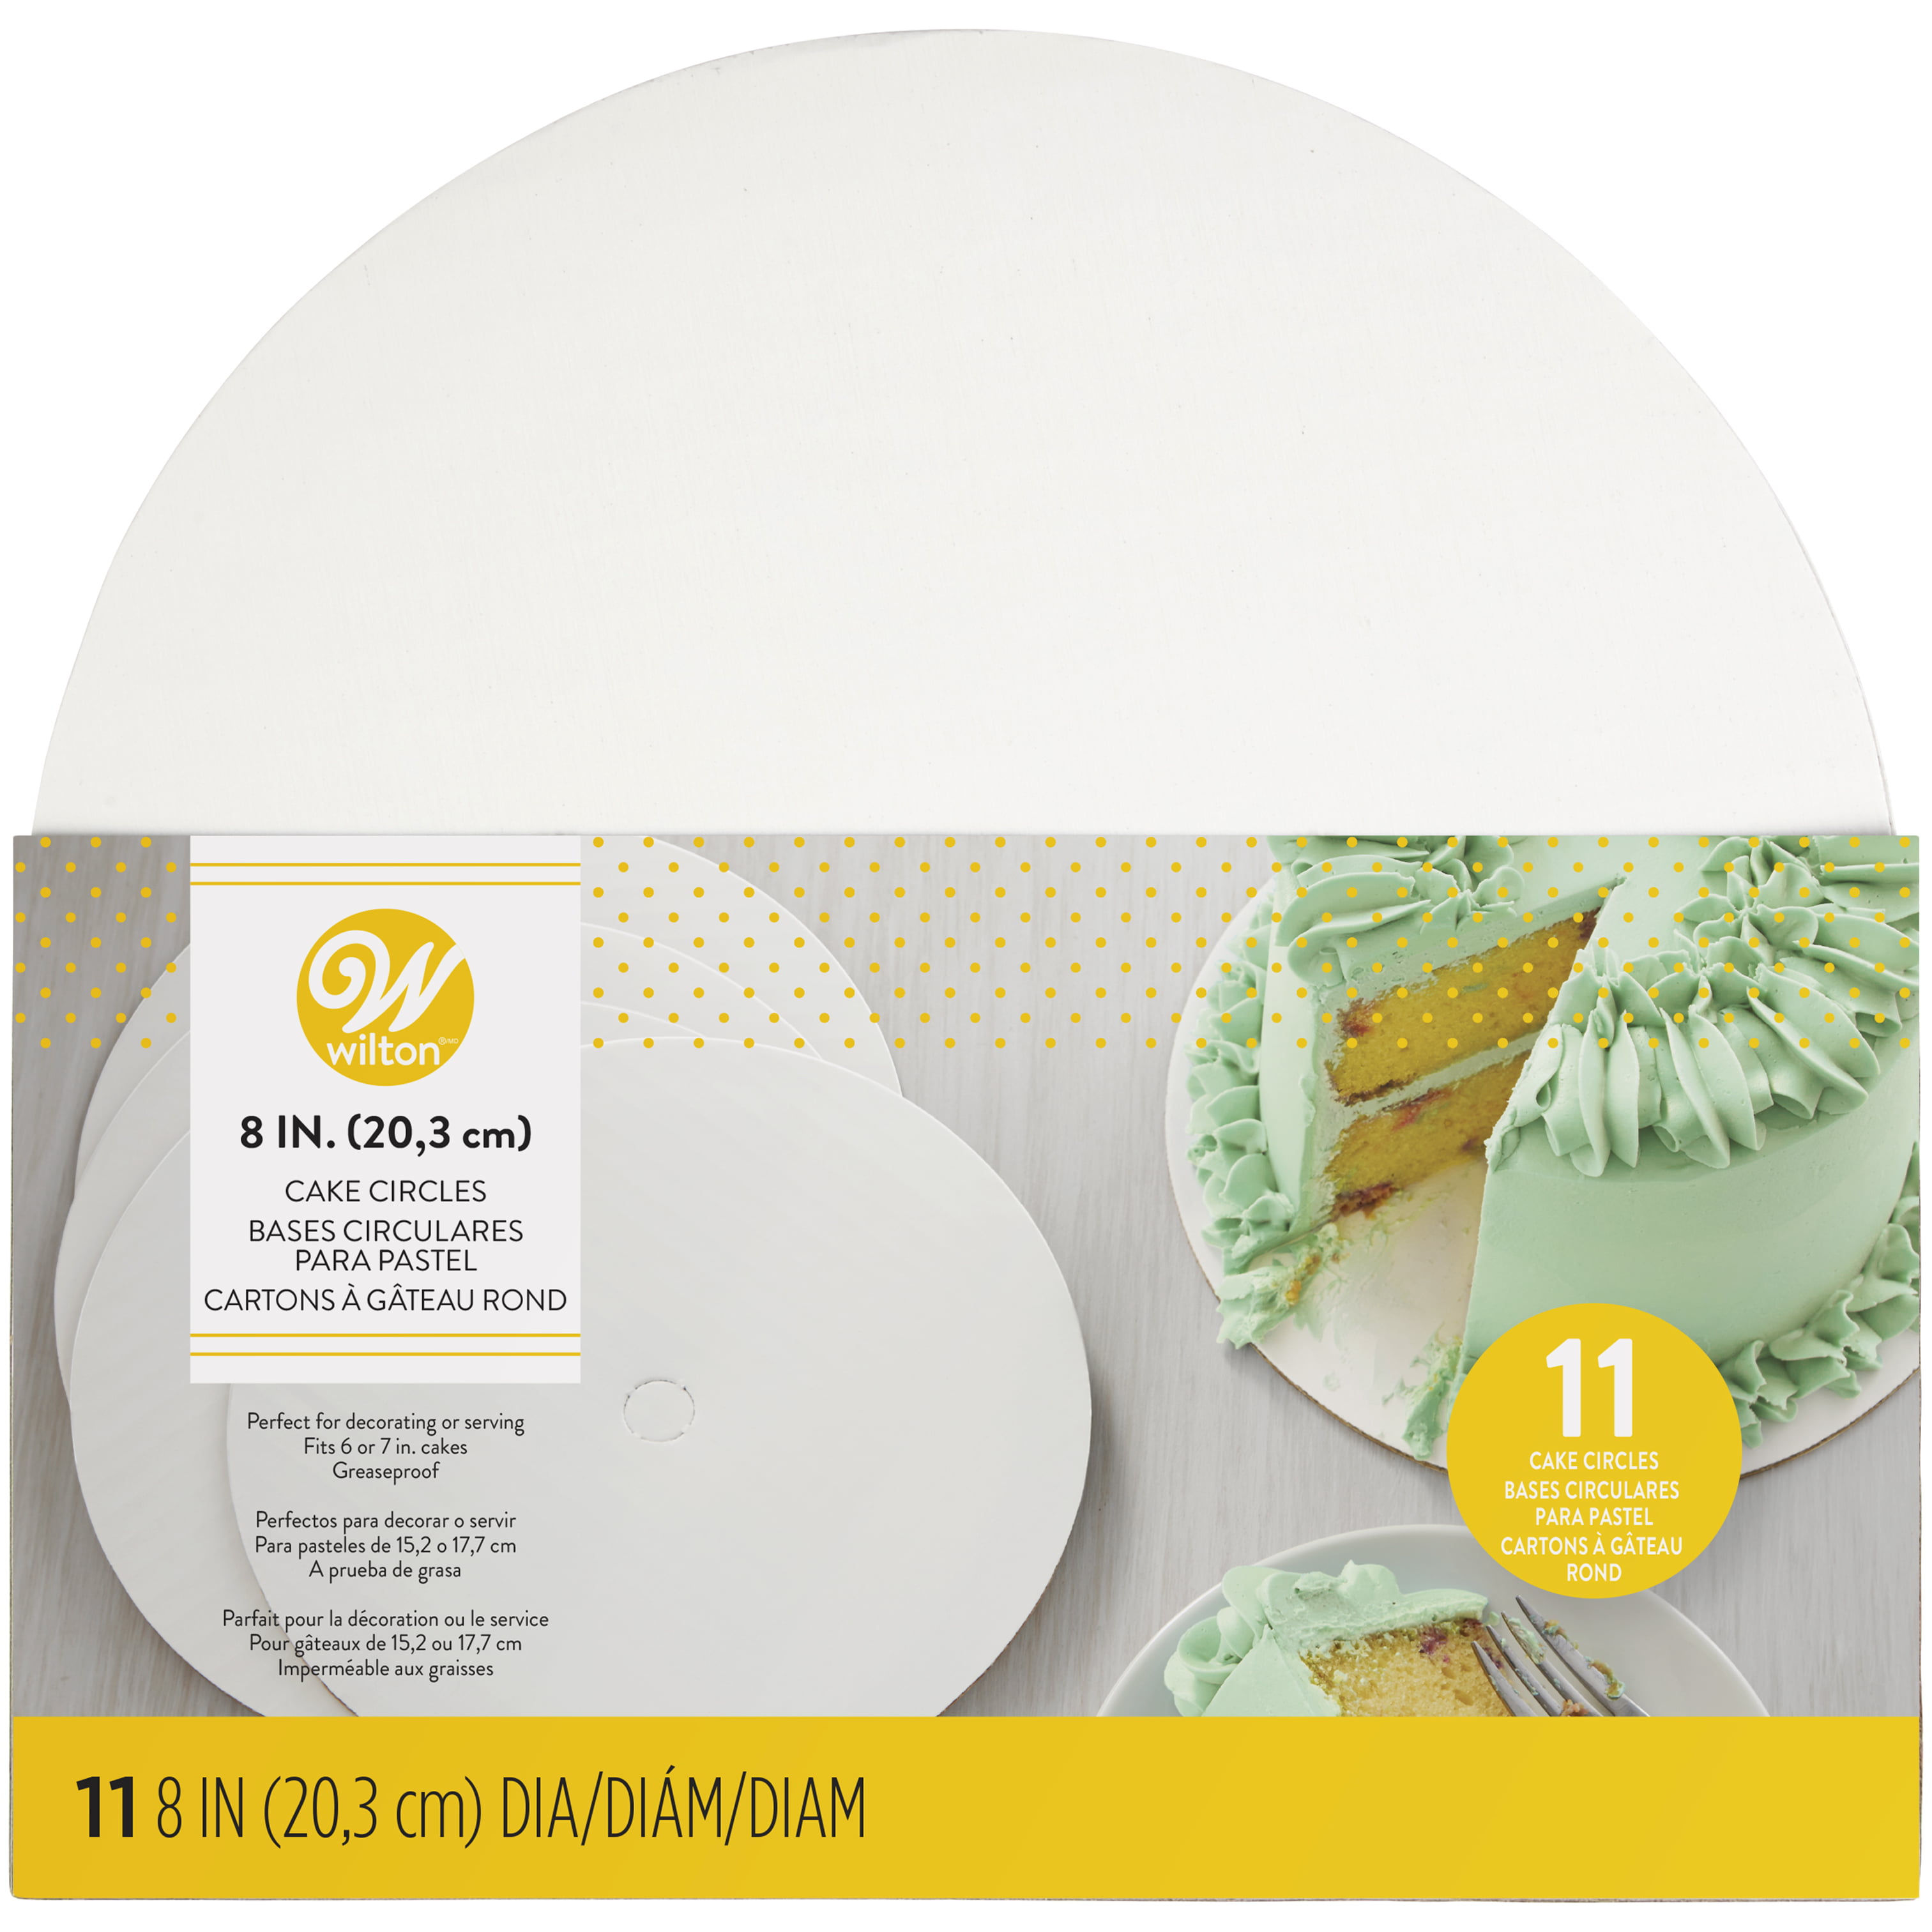 Pack of 5 Cut Edge Round Cake Boards Support Cards 9 Inches